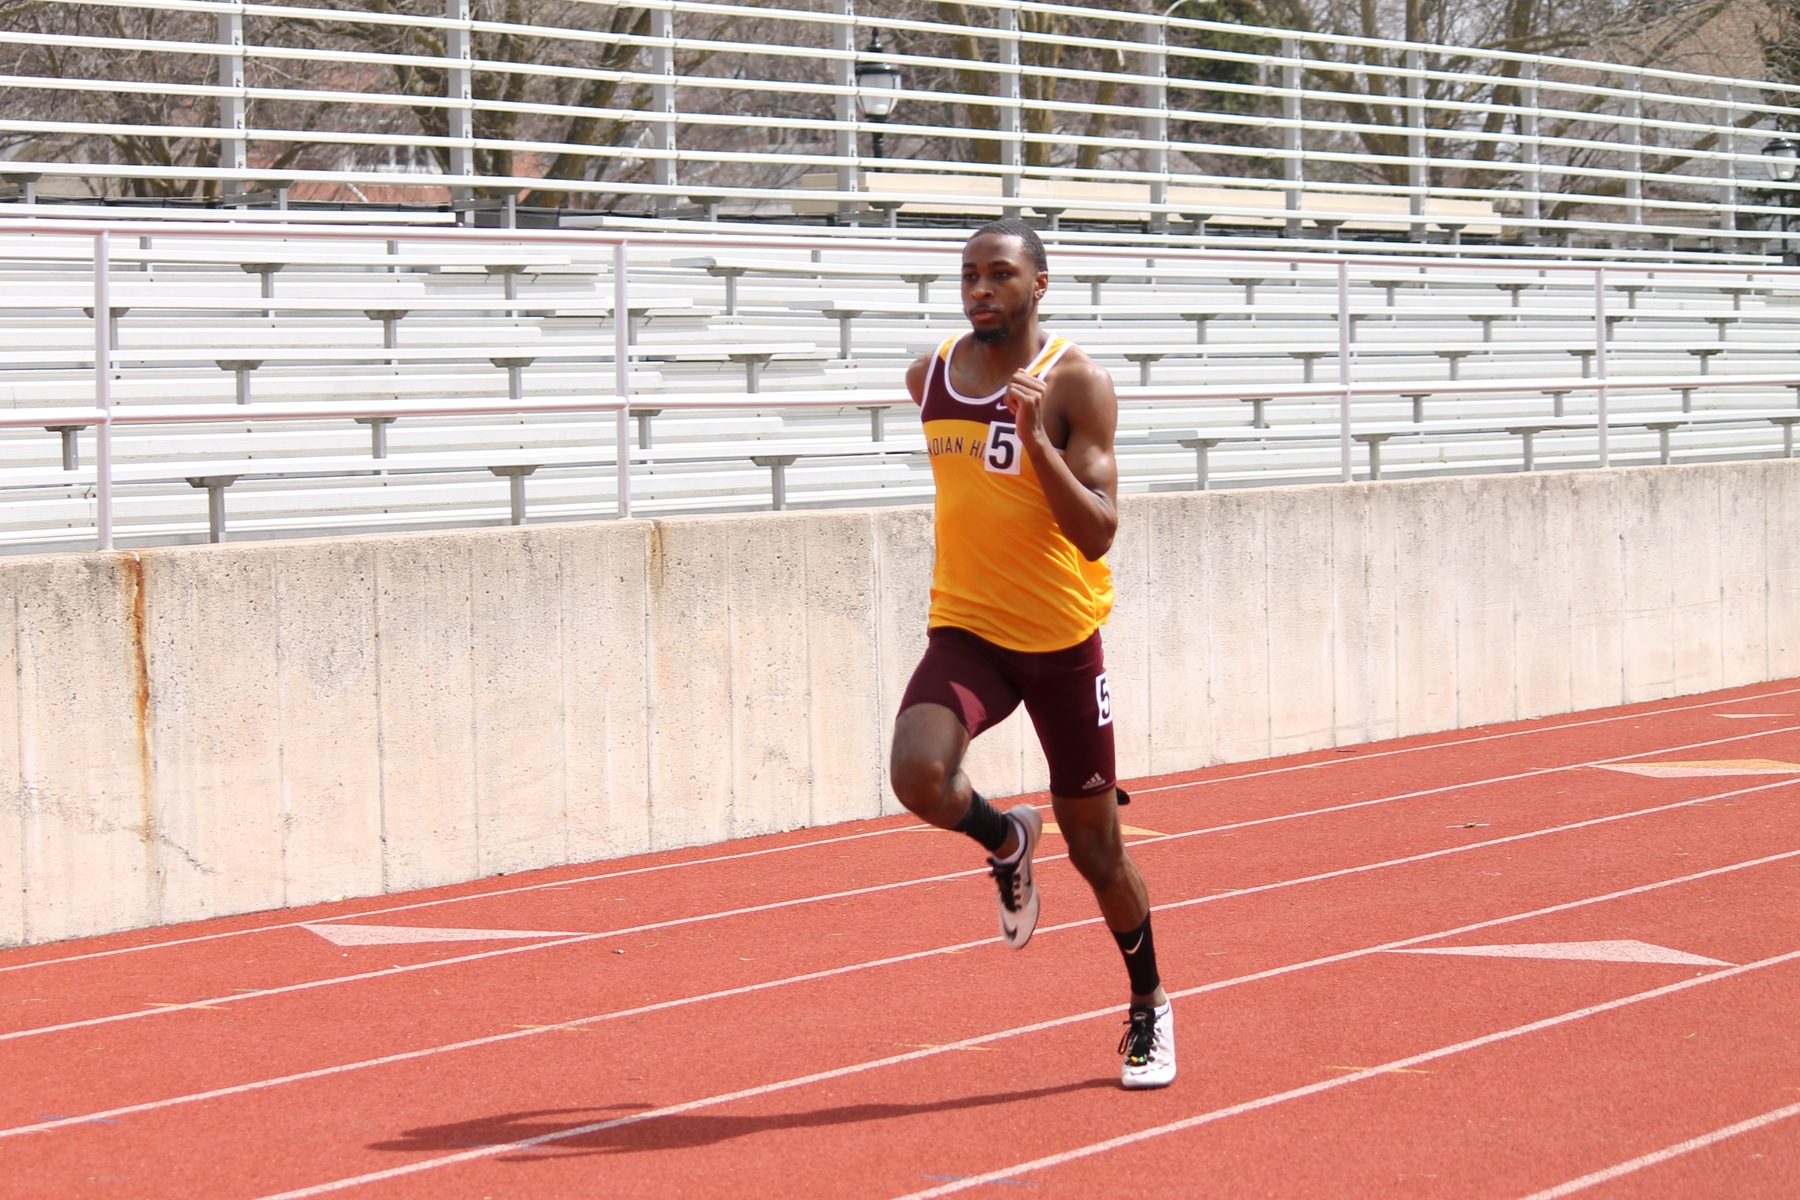 Jeremy Leath runs a personal best time of 50.08 in the 400m at Kip Janvrin.